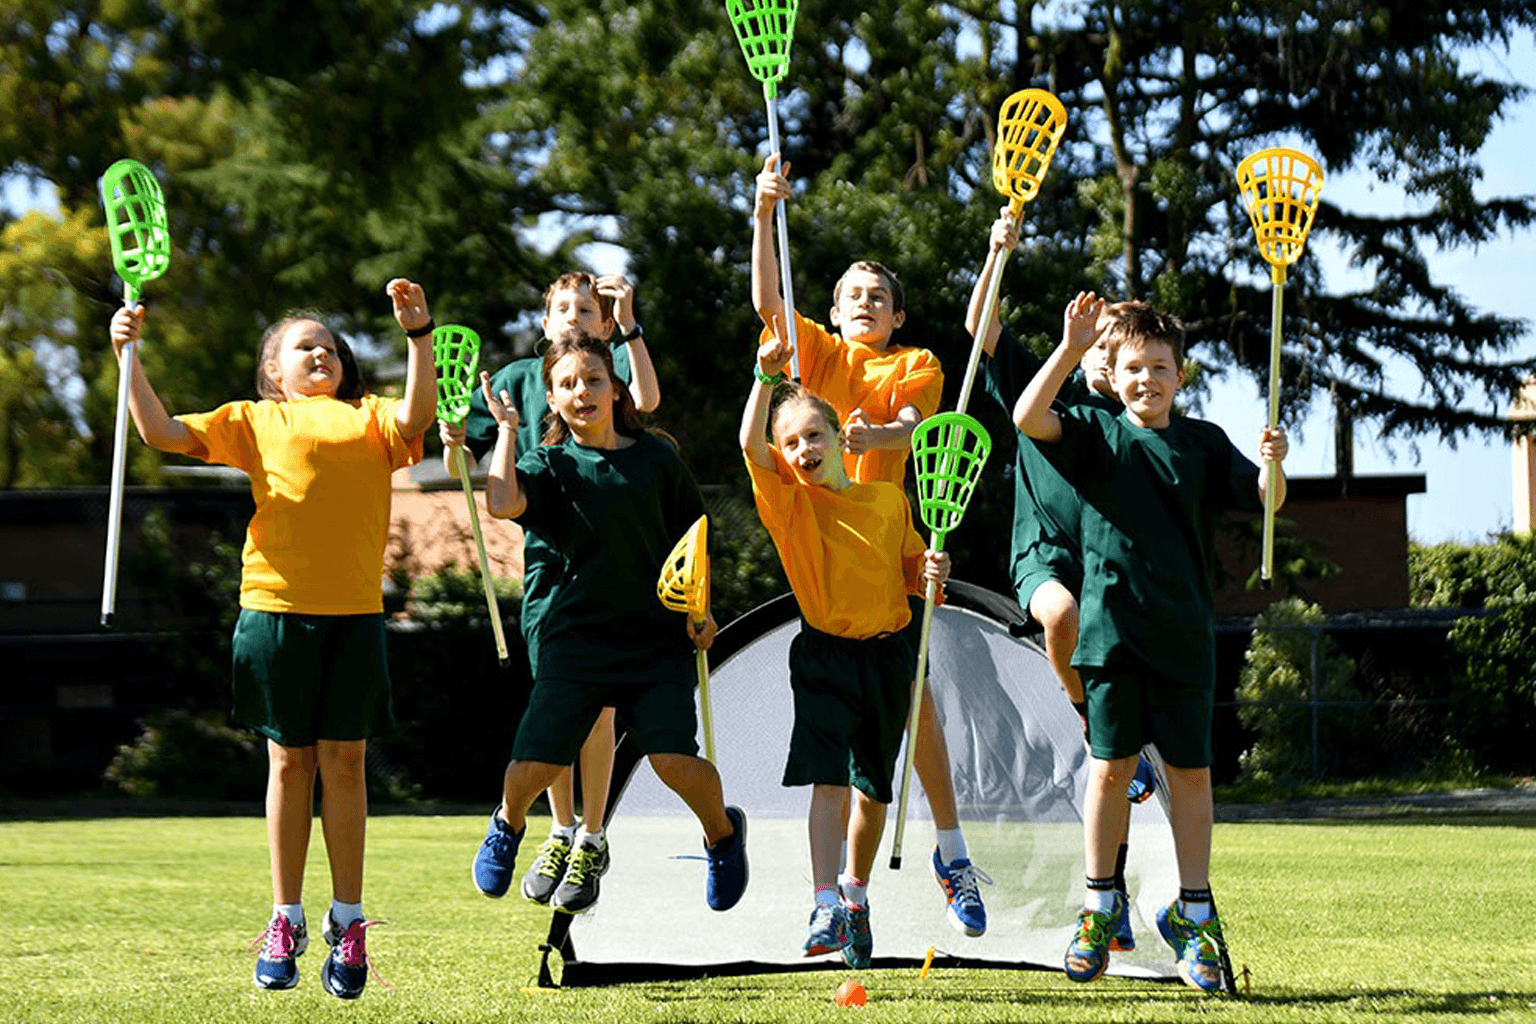 School children jumping on a grass field with lacrosse sticks 